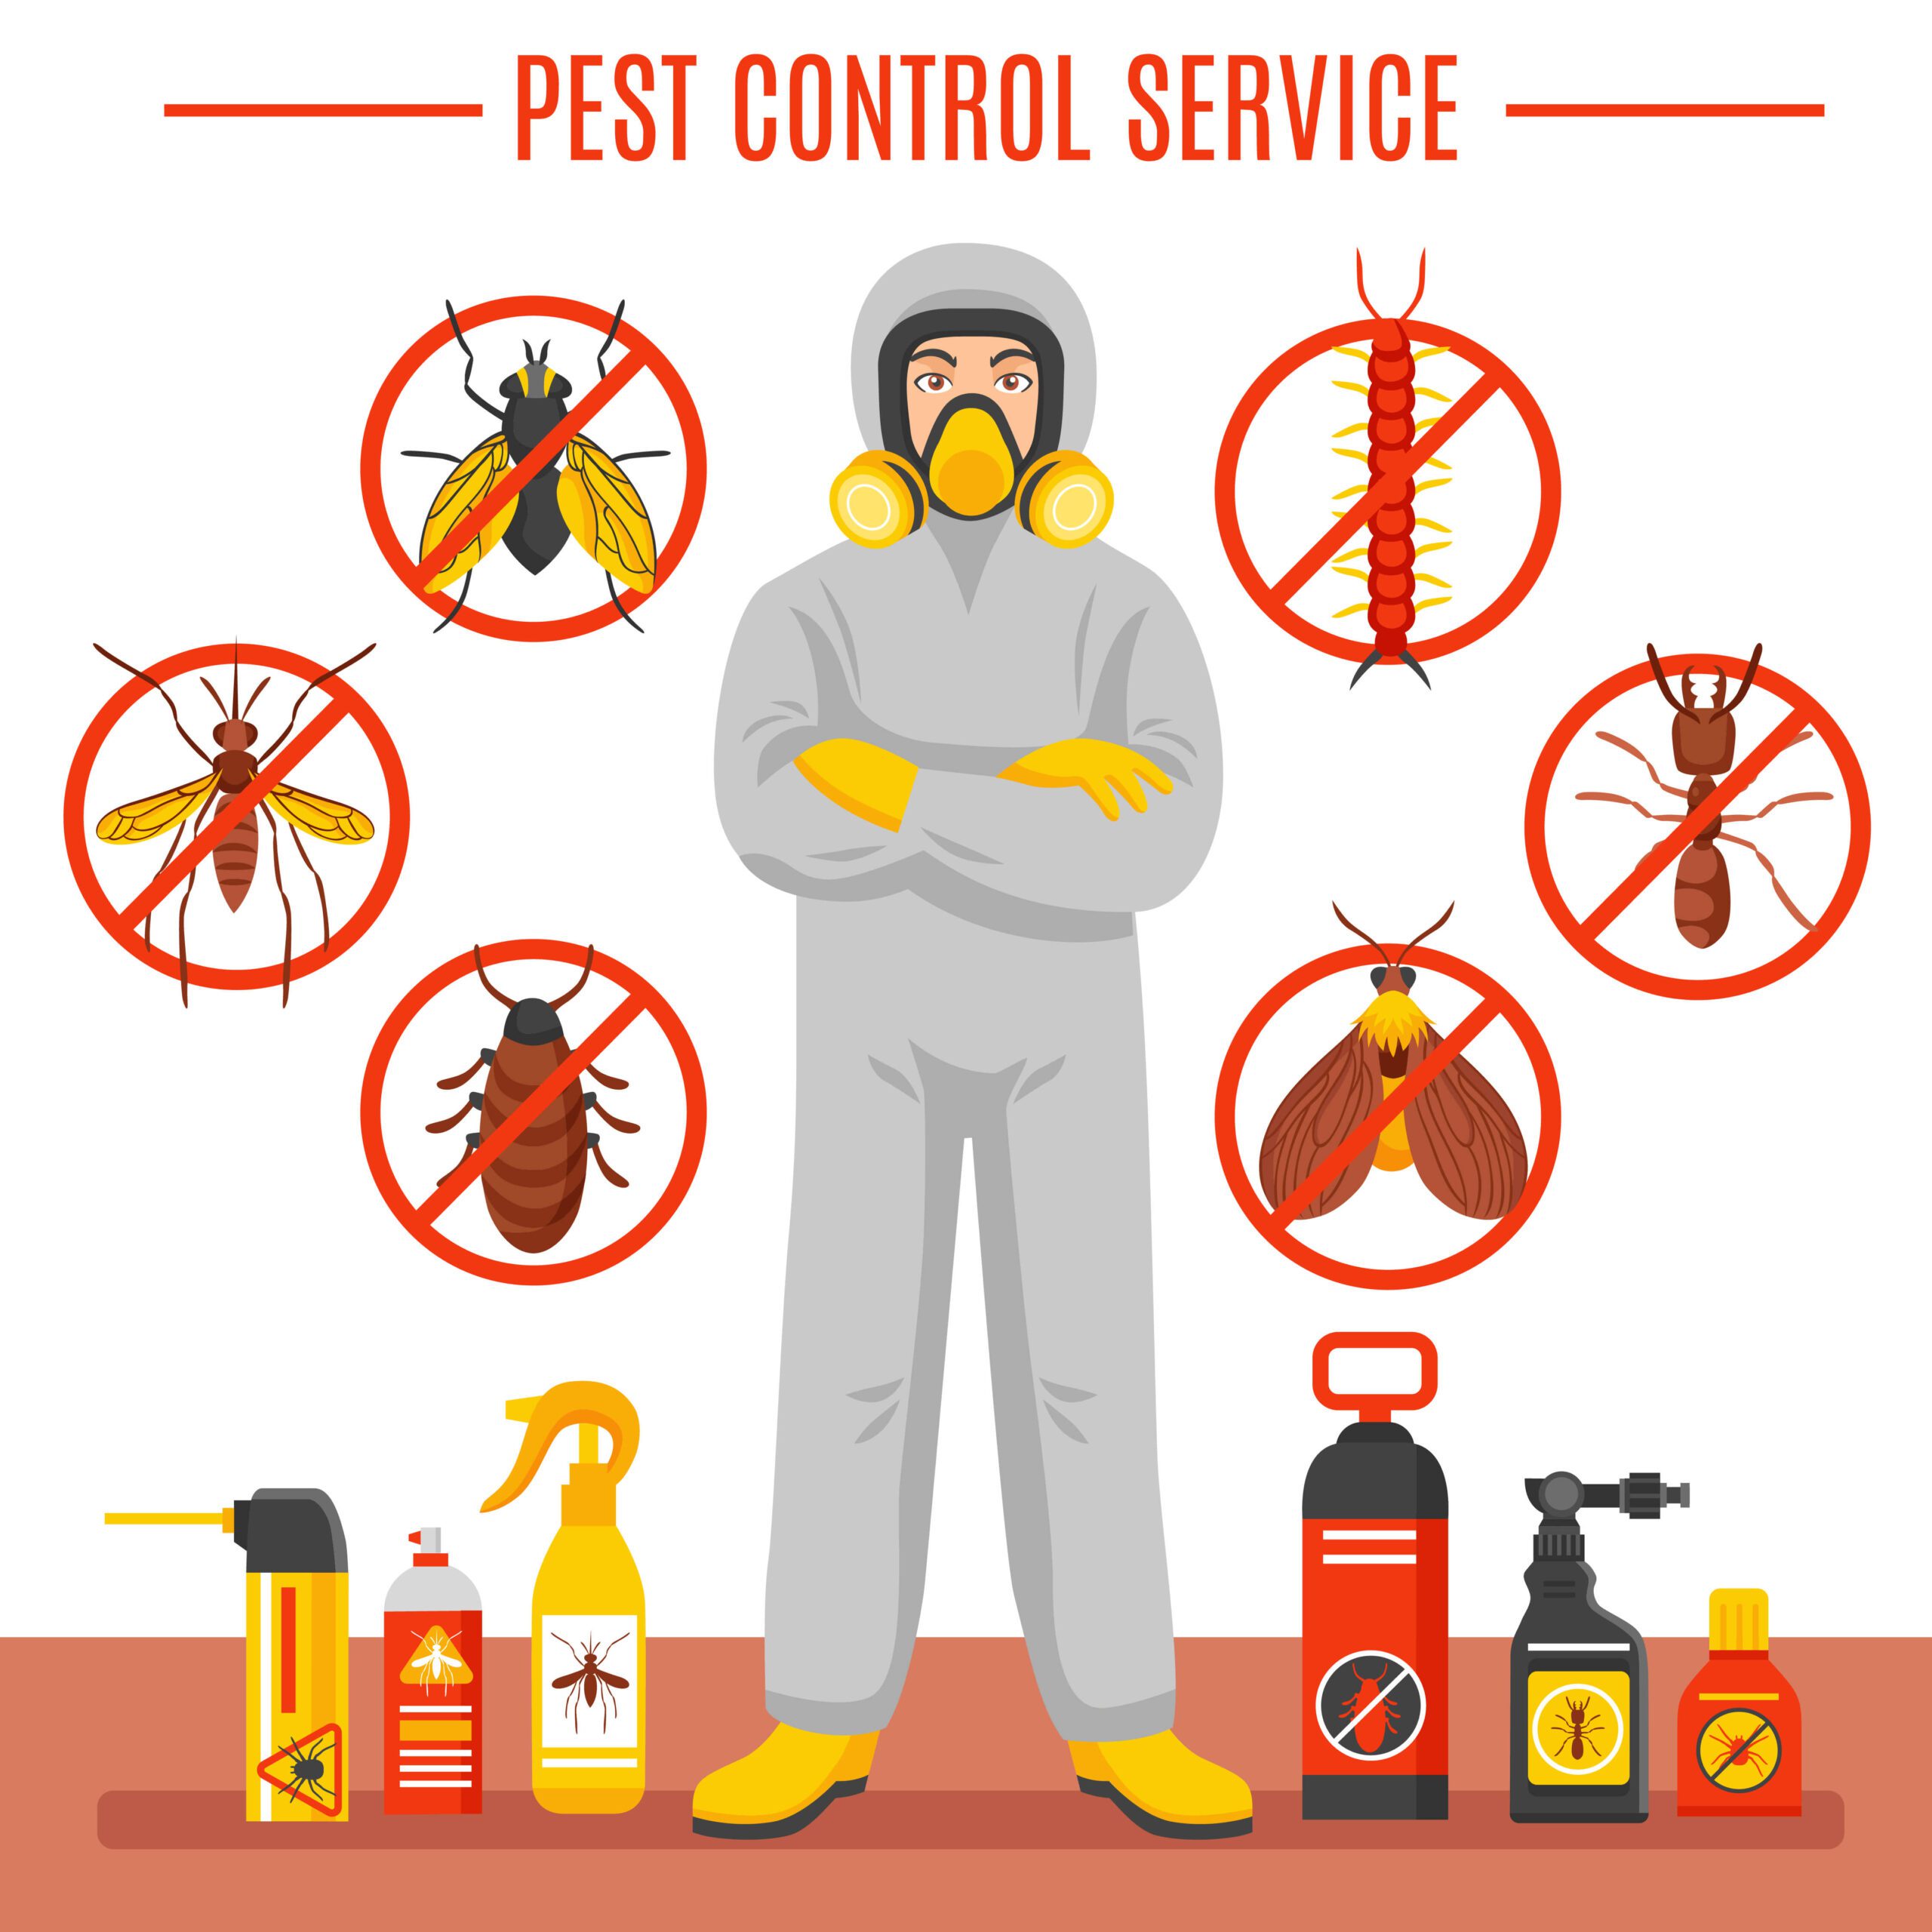 Where can I Get Various Types of Pest Control Services in India